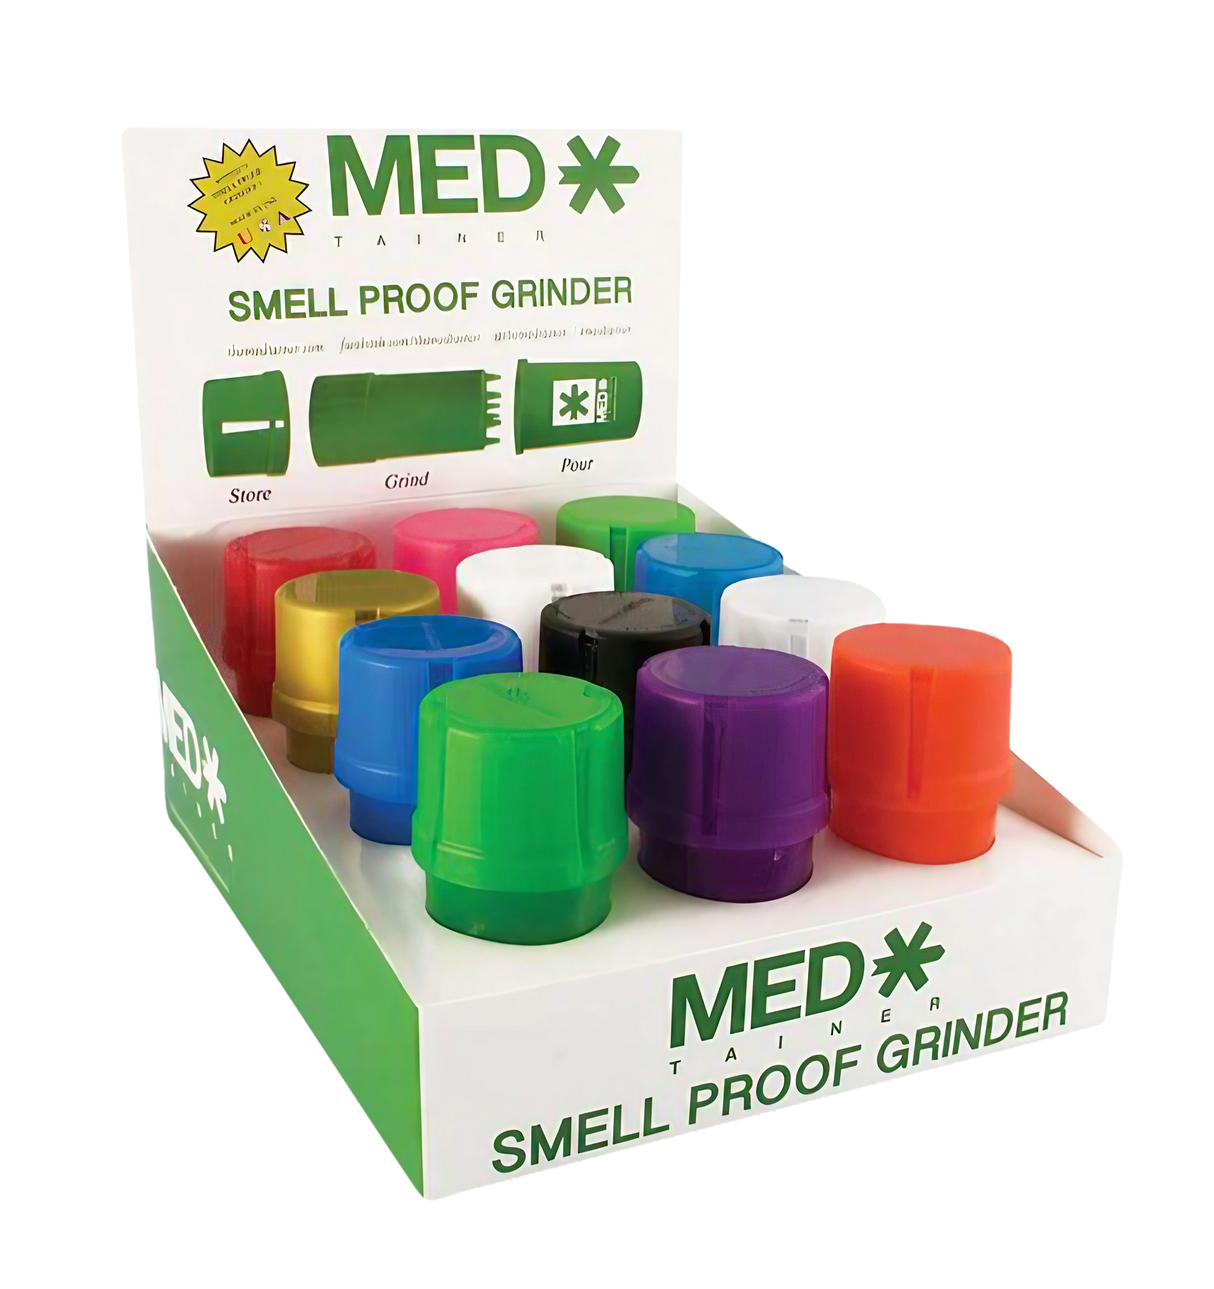 Medtainer Storage Container 12 Pack in assorted colors displayed with product packaging